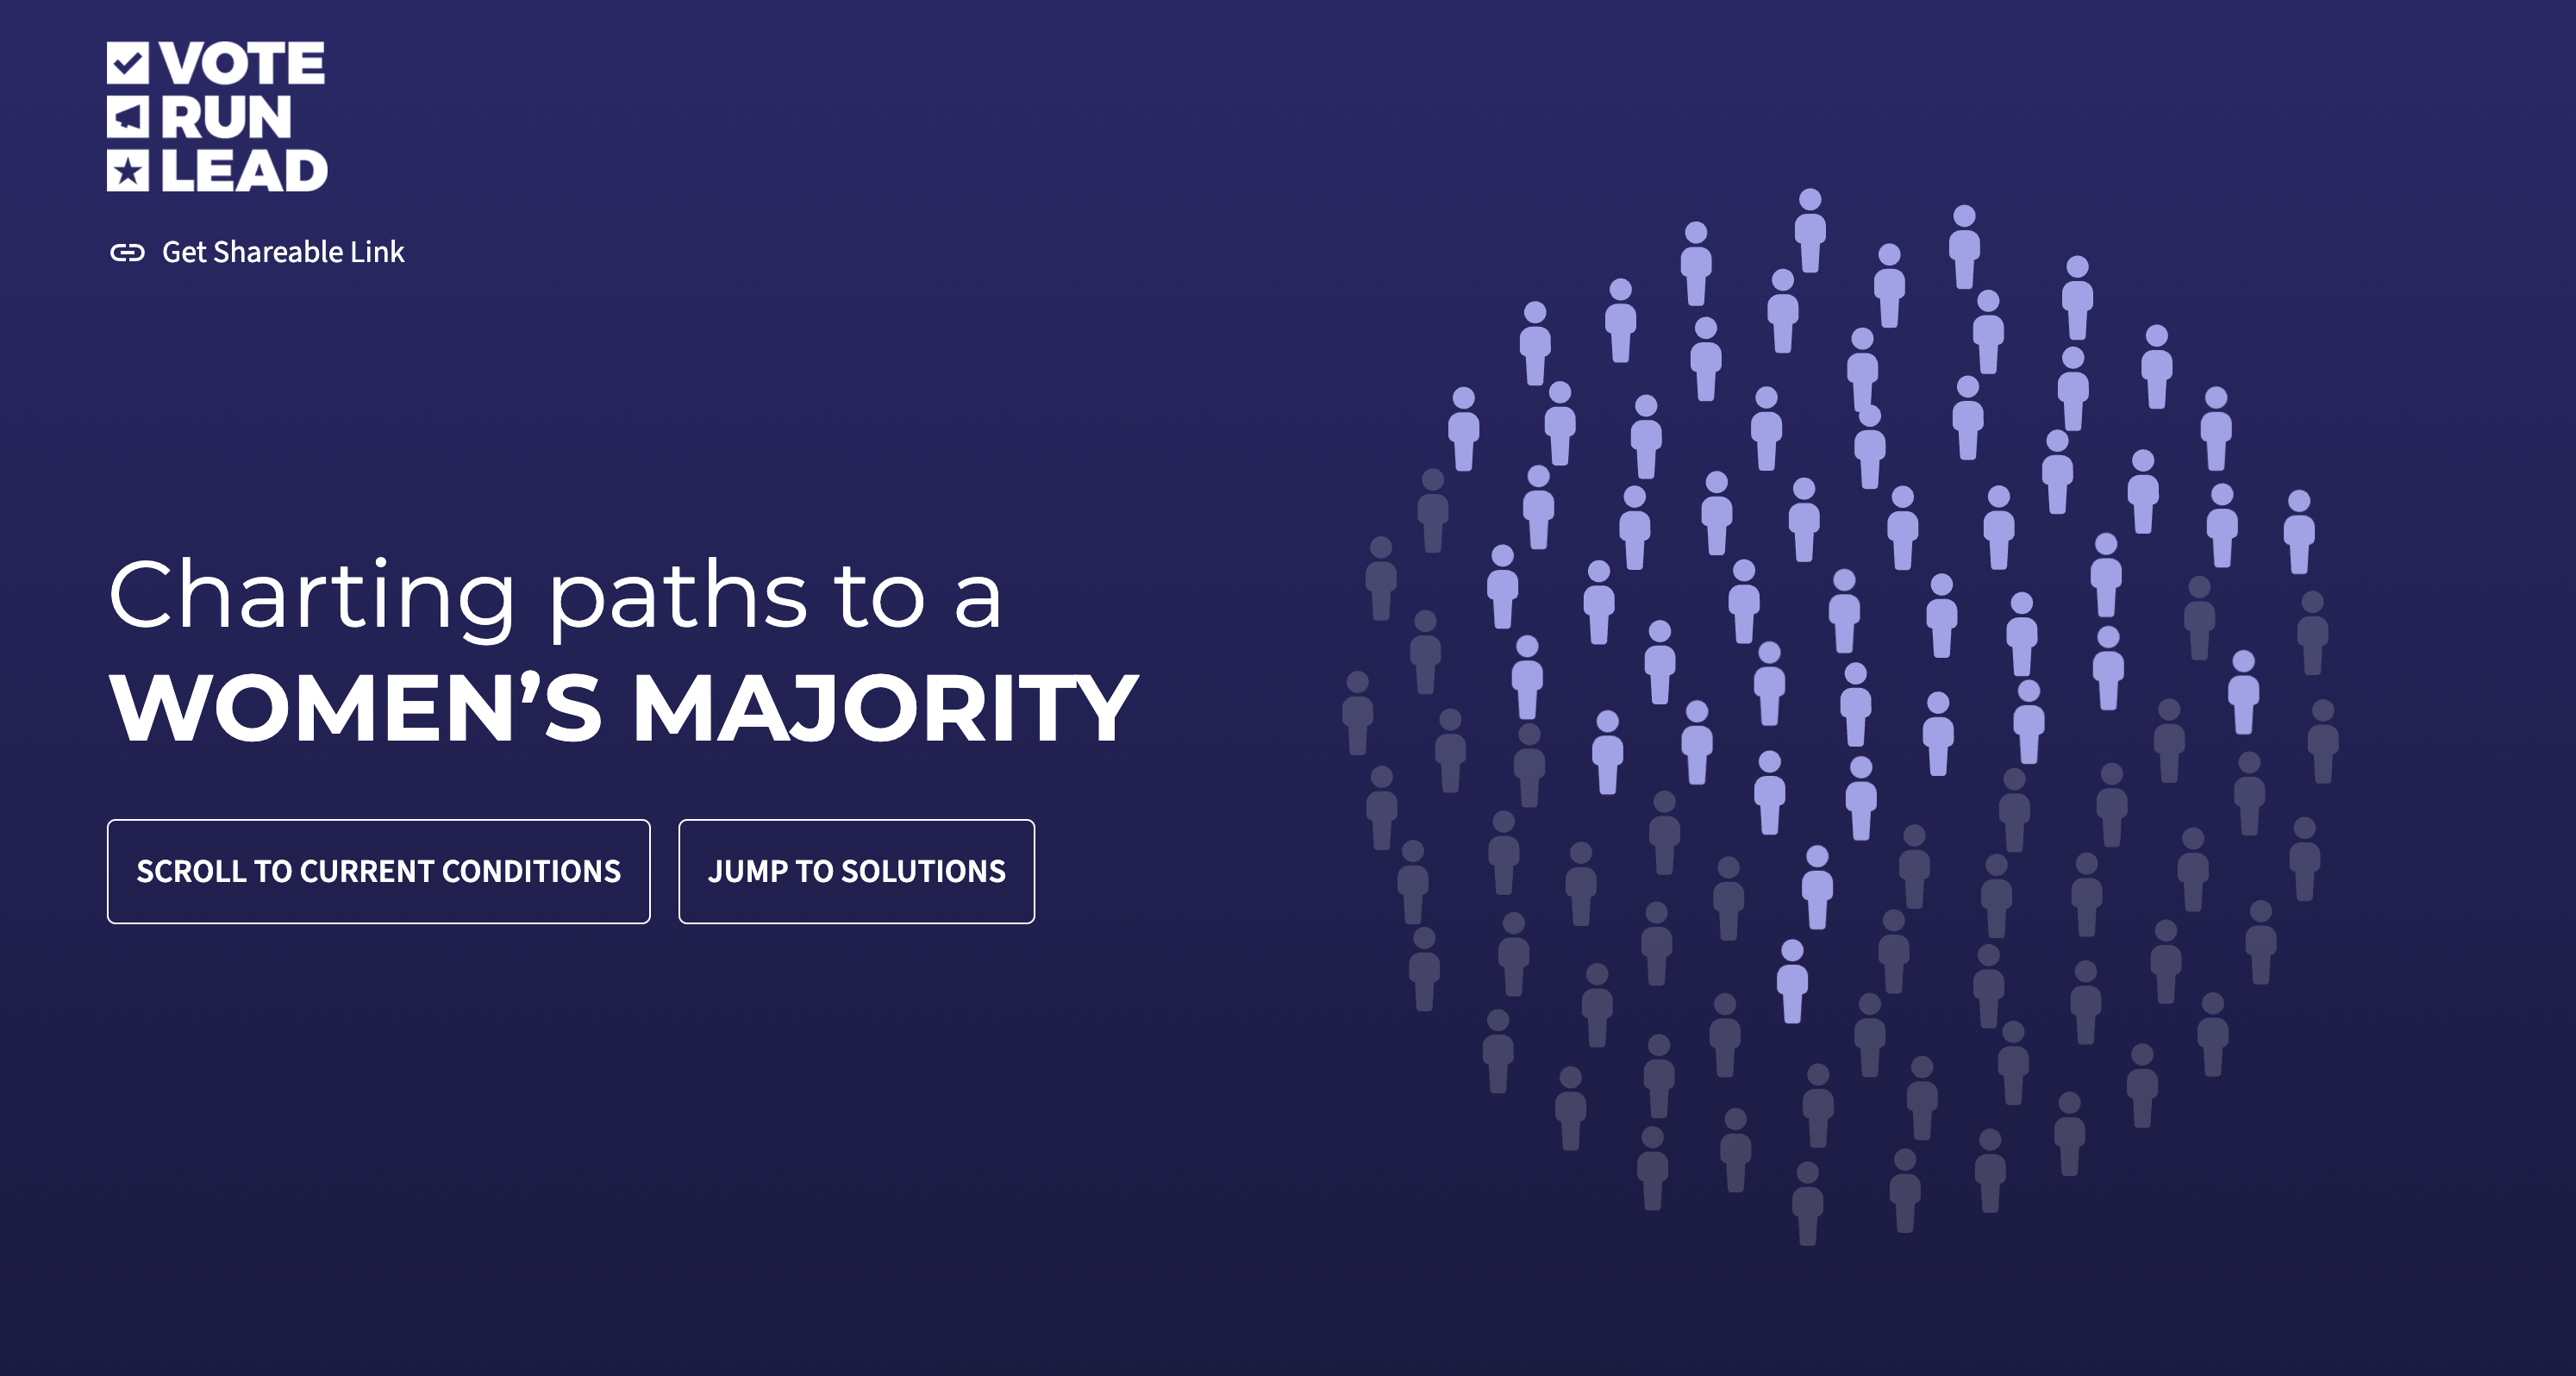 The first fold, hero image of the project 'Charting Paths to a Women's Majority' provides two action buttons for a user to 